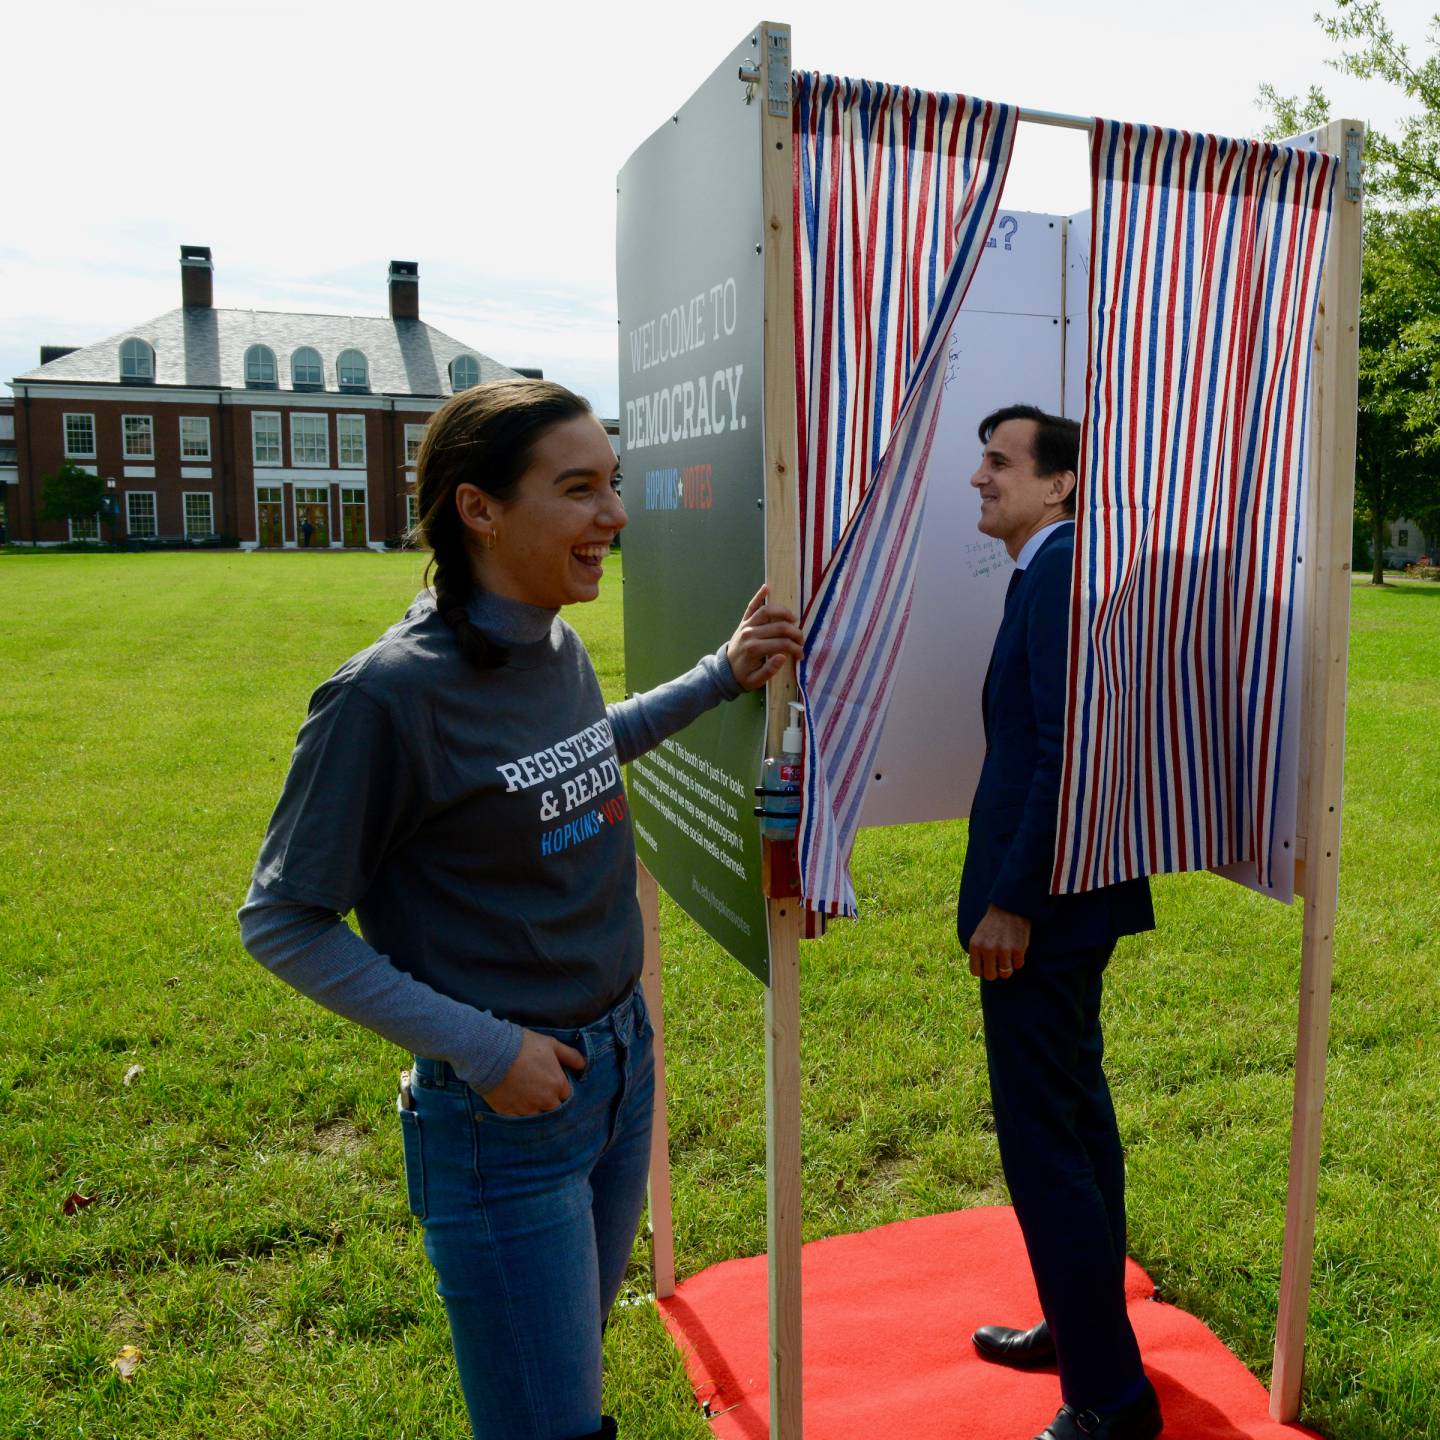 A student and Ron Daniels interact with the voter booth